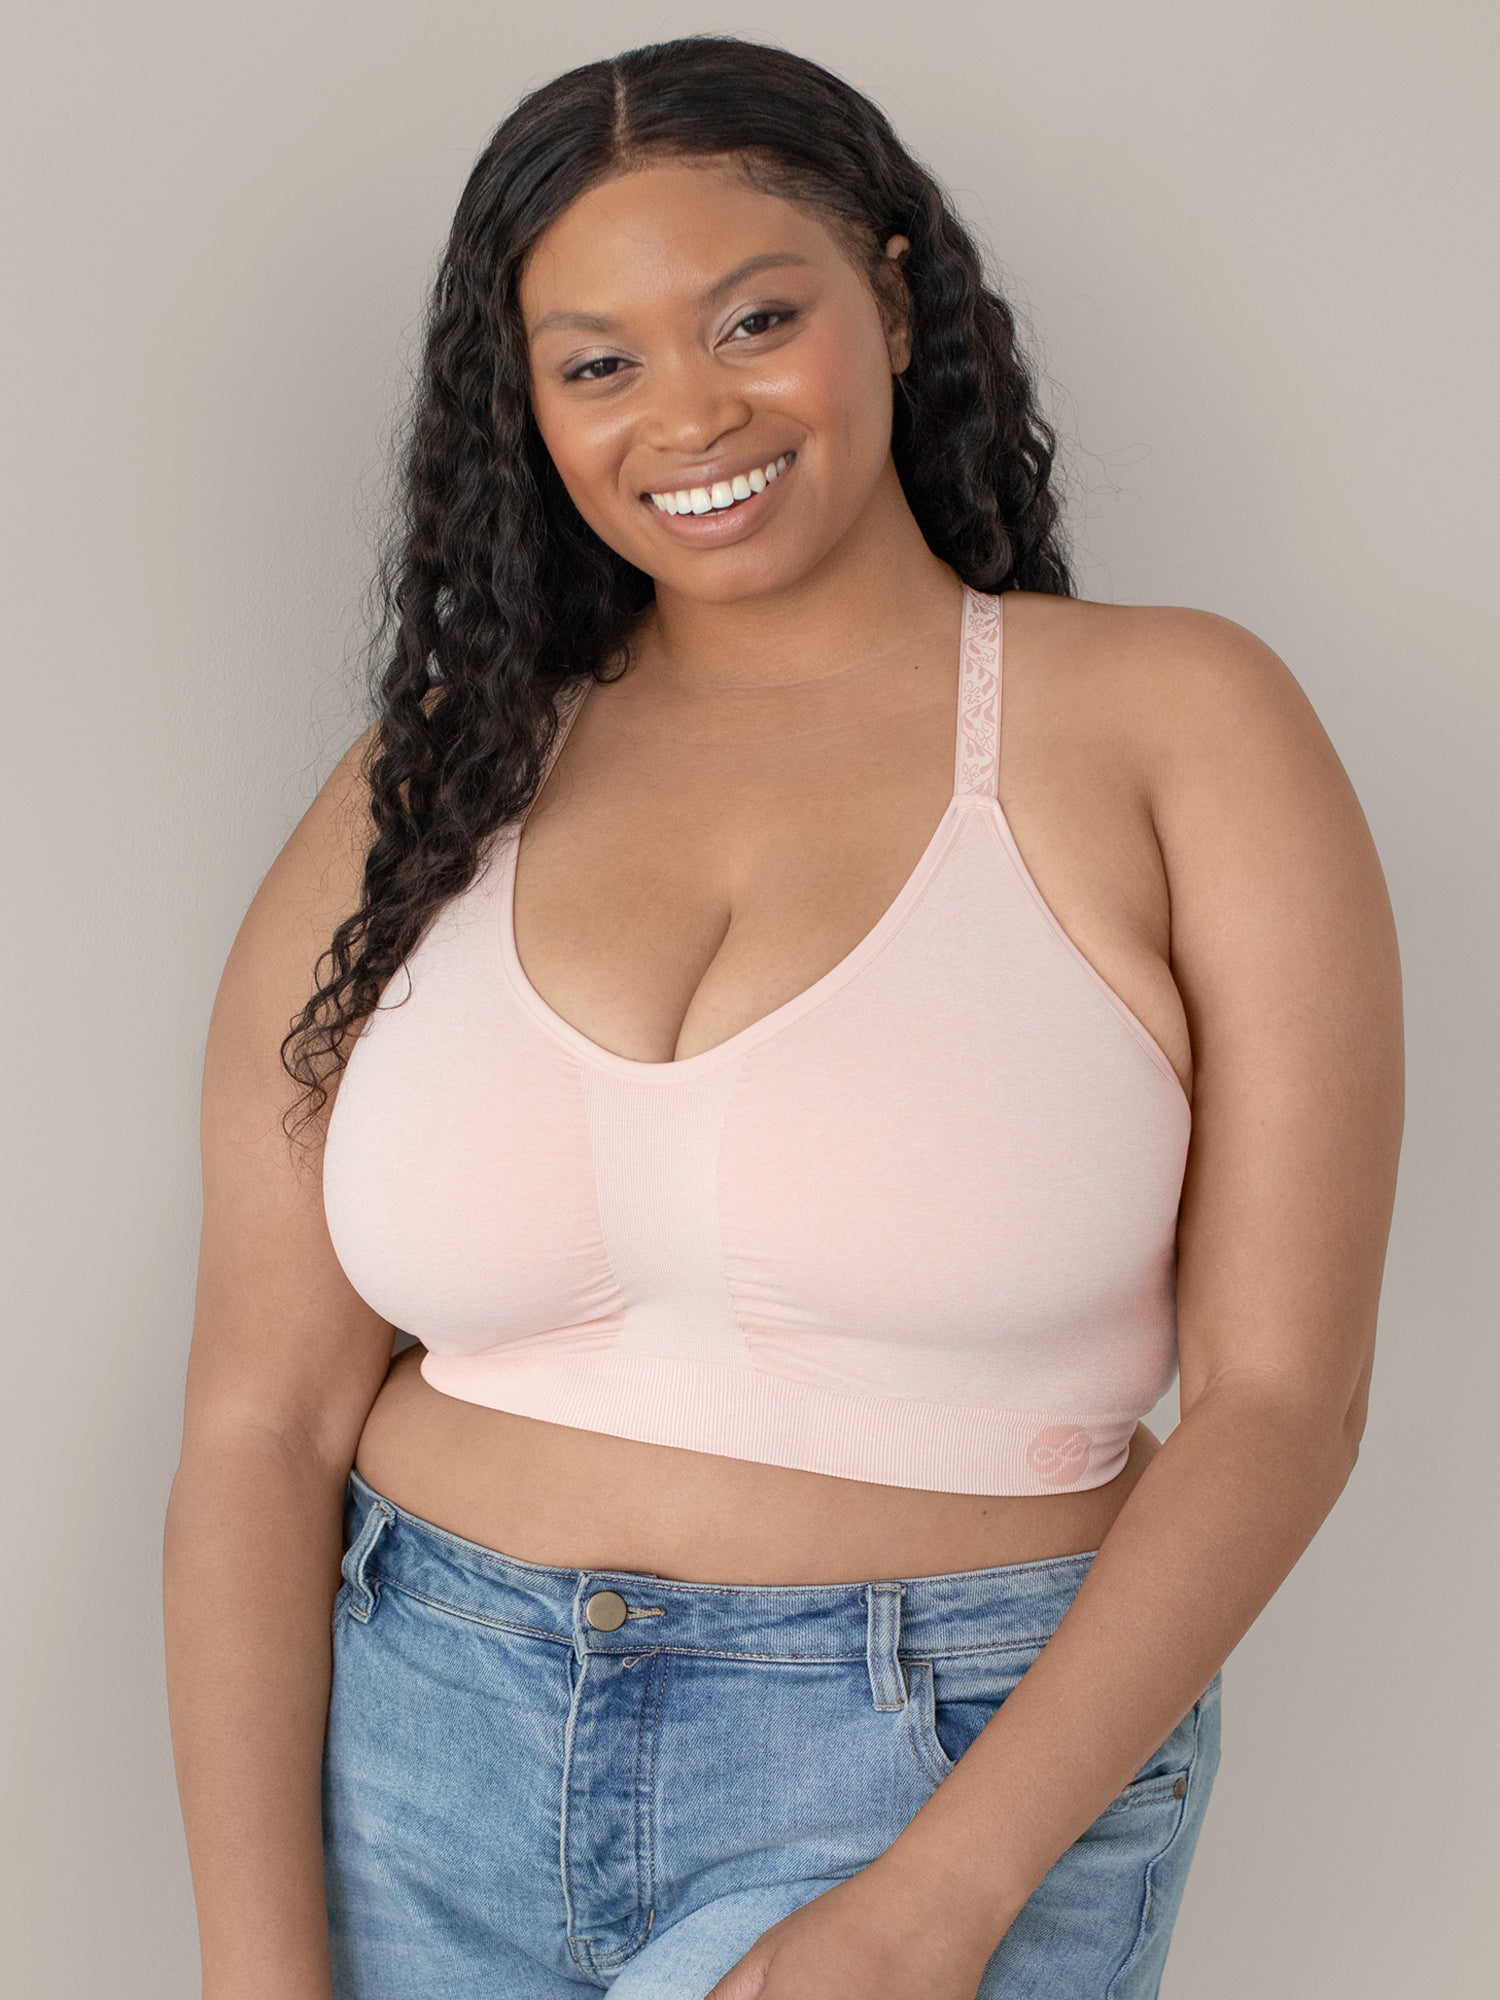 Model wearing the Diana Sublime® Sports Bra in Pink Heather@model_info:Alexis is wearing an X-Large Busty.